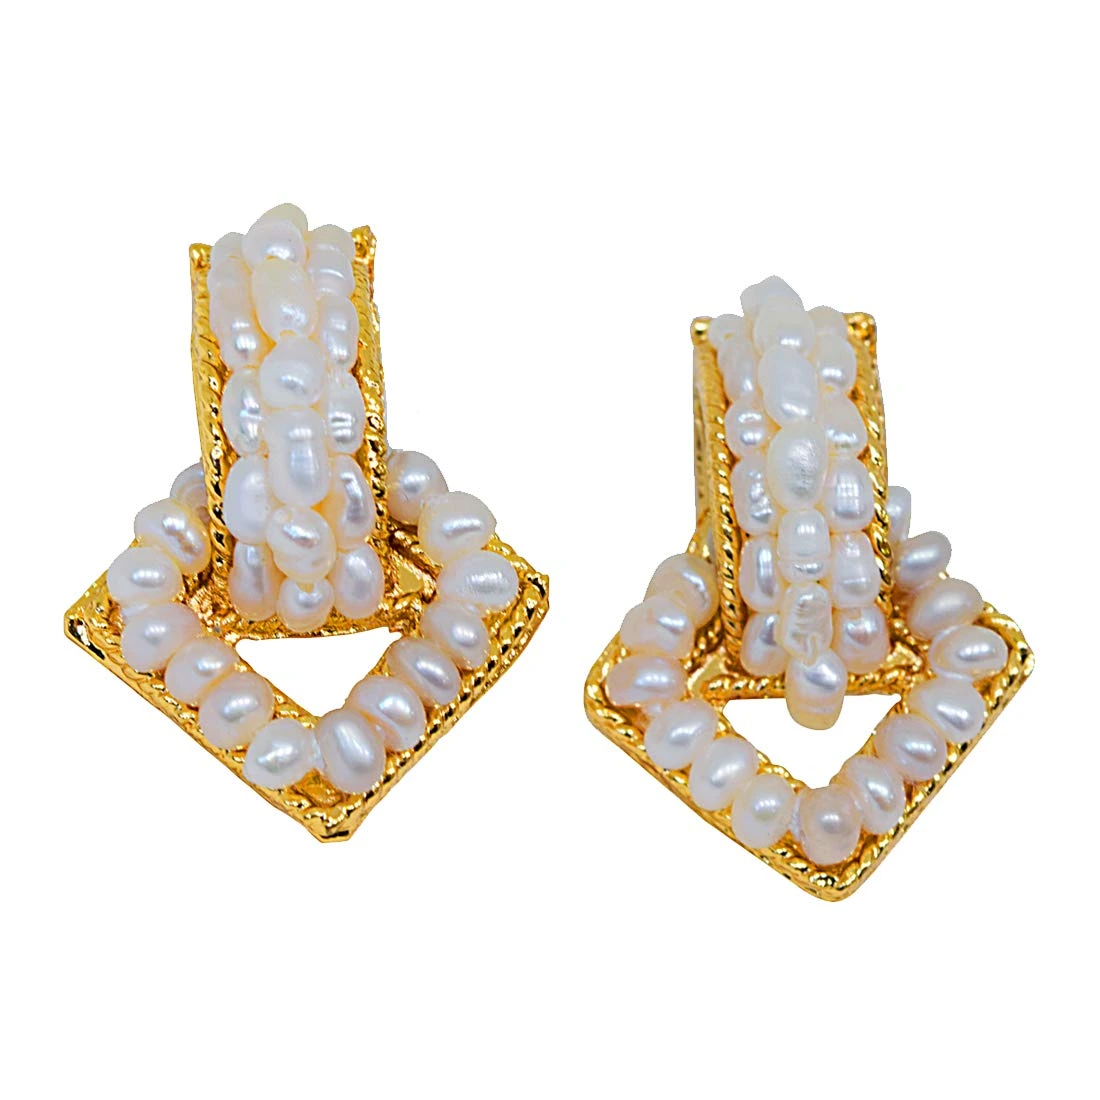 Enchanting Pure - Geometical Shaped Freshwater Pearl & Gold Plated Earrings for Women (SE49)